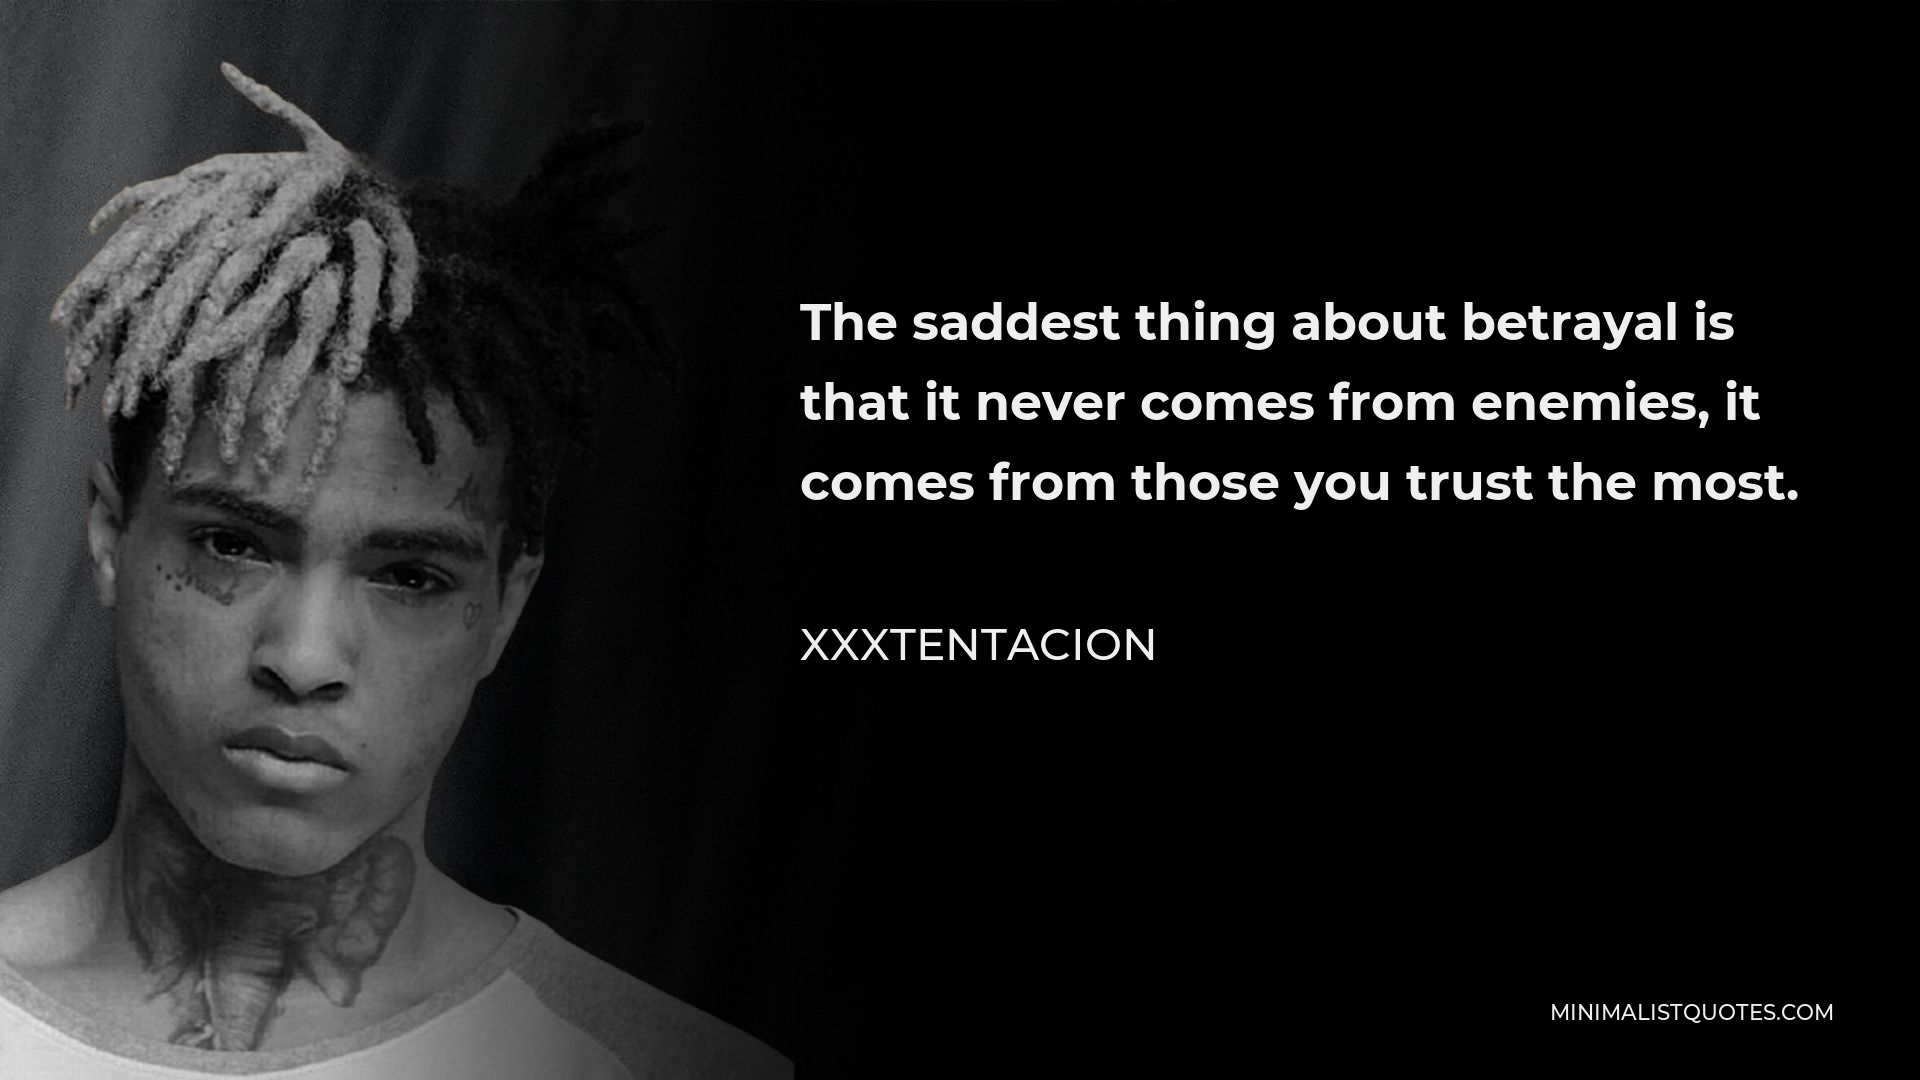 Xxxtentacion Quote - The saddest thing about betrayal is that it never comes from enemies, it comes from those you trust the most.